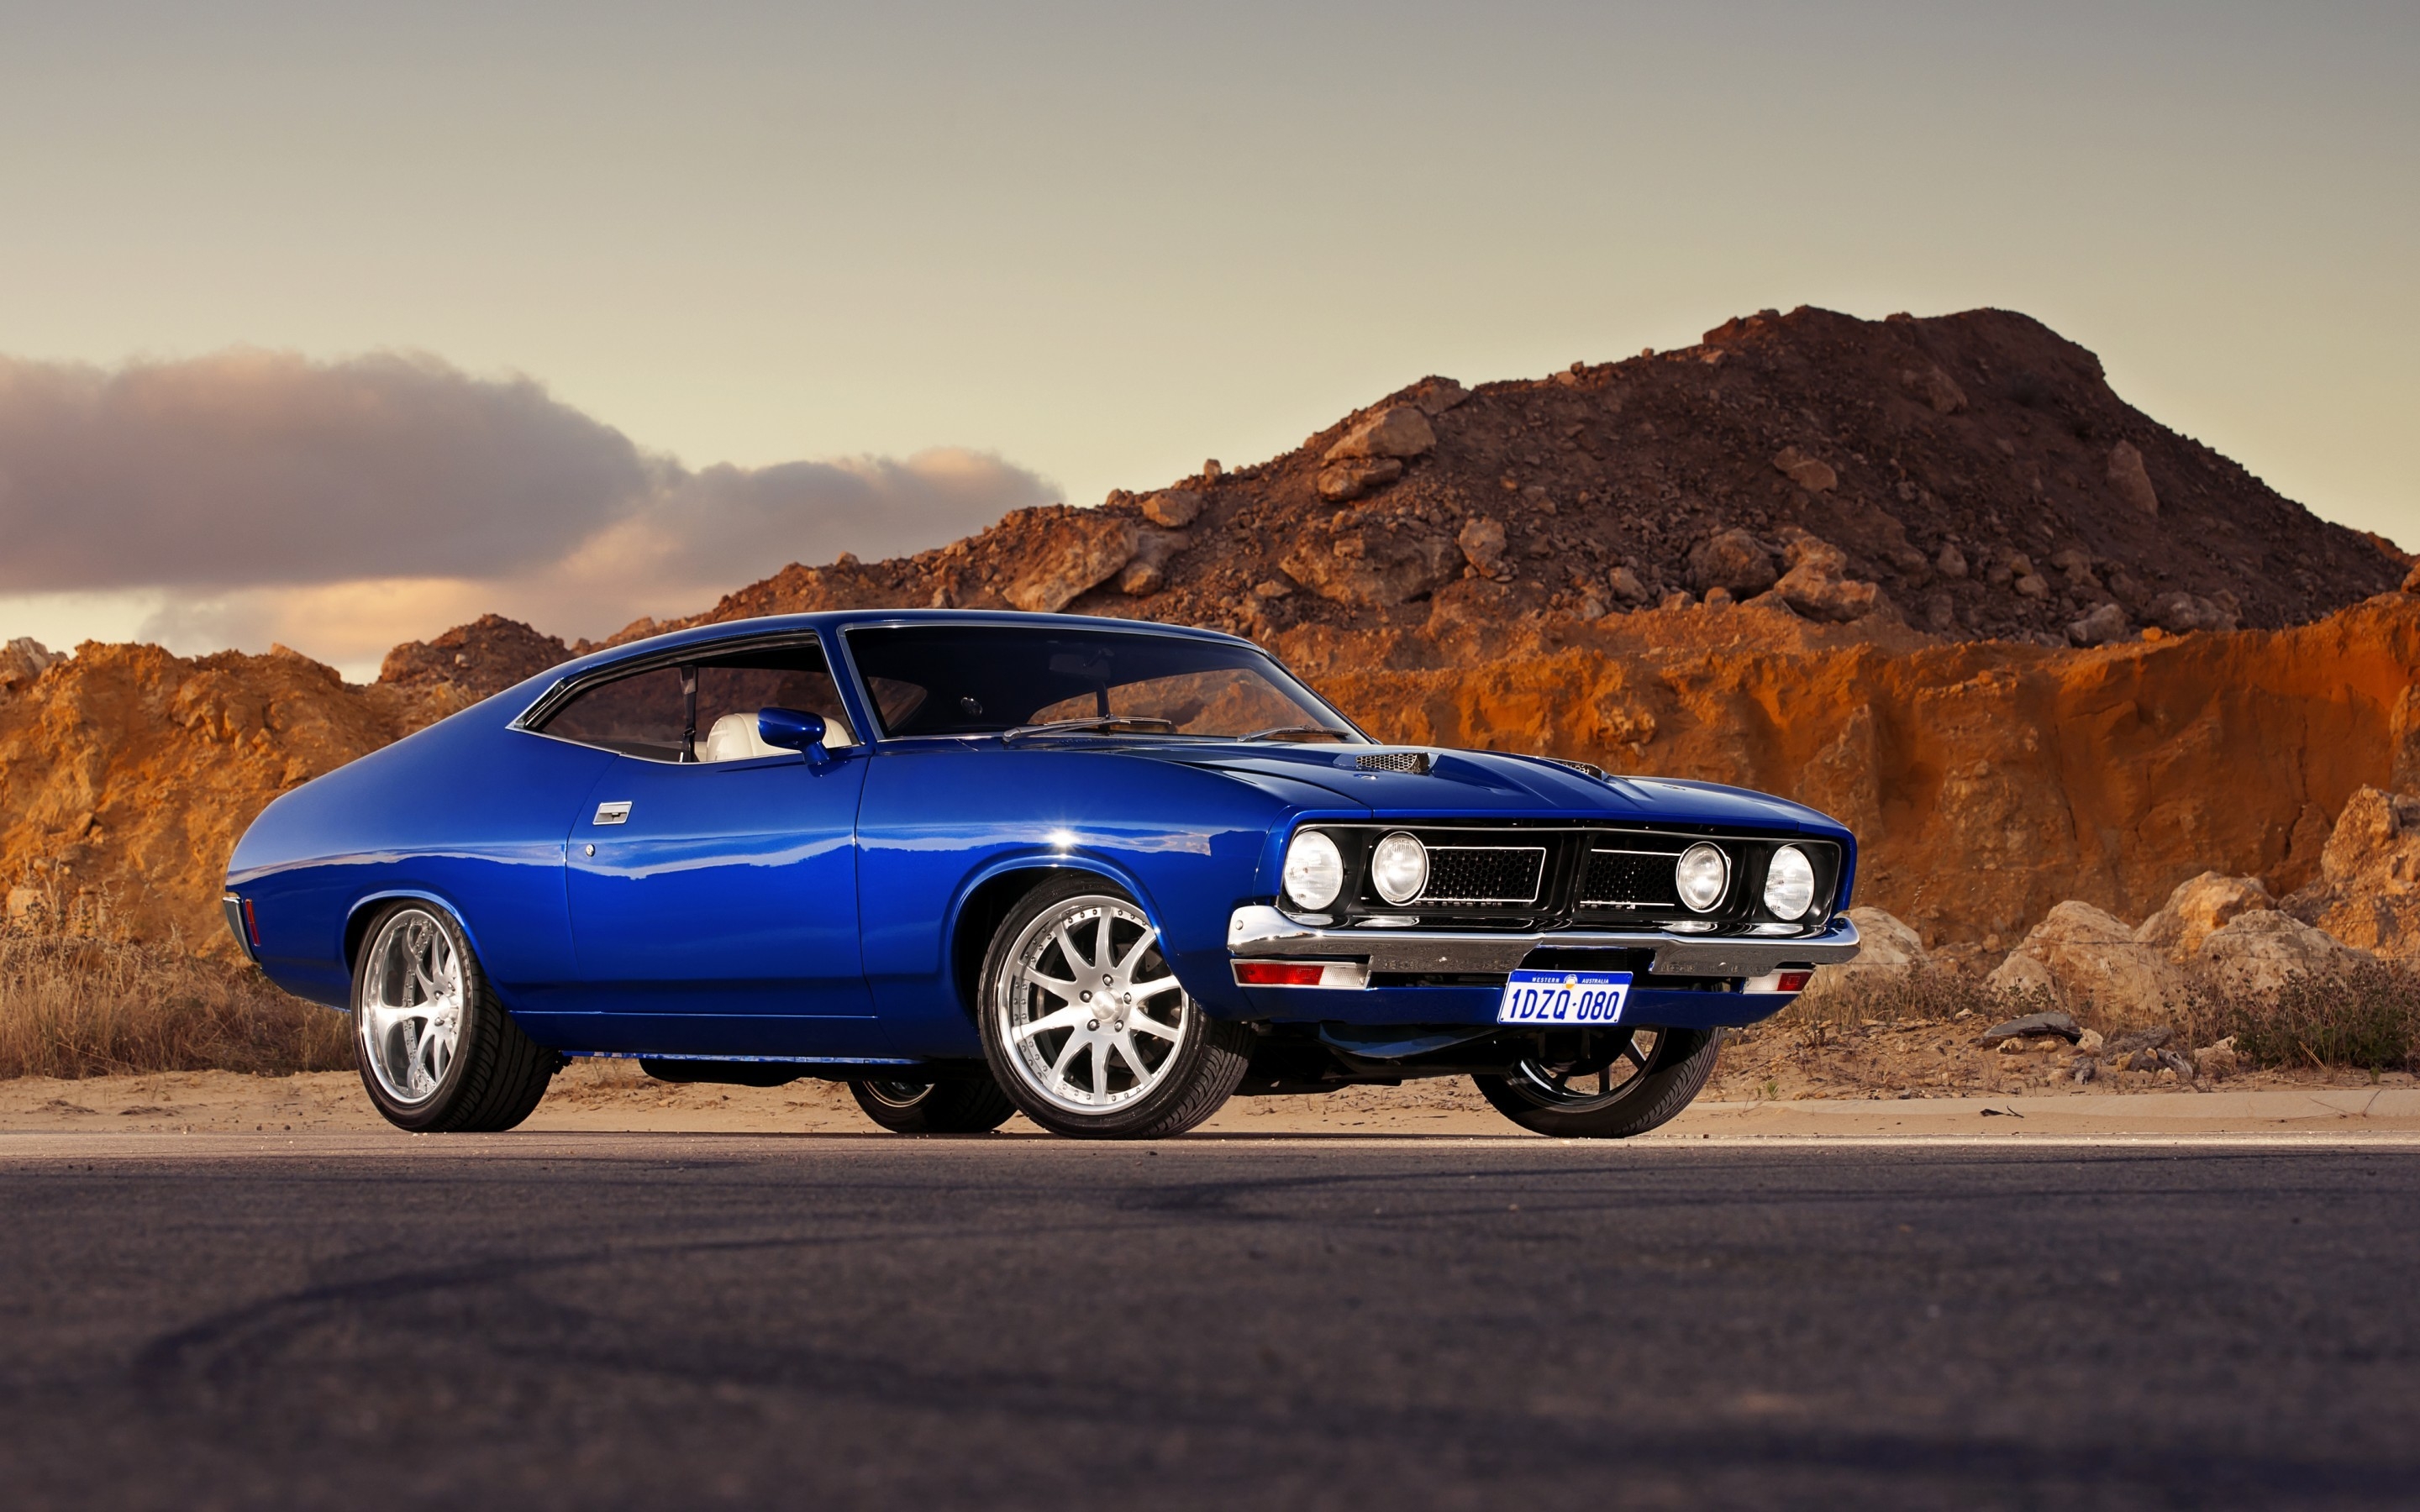 Ford Falcon GT for 2880 x 1800 Retina Display resolution